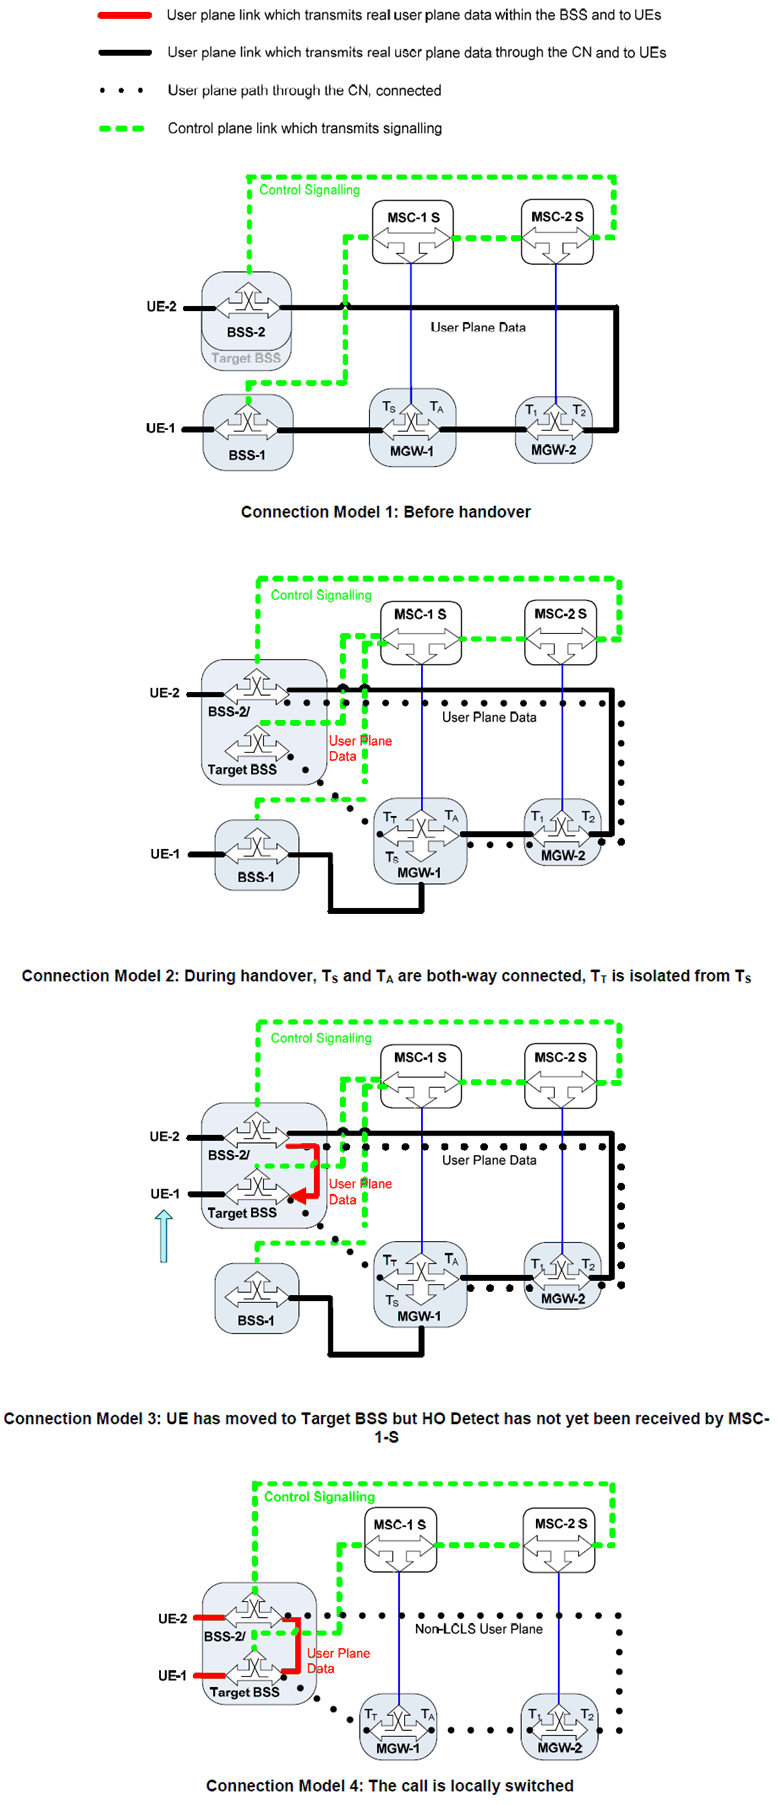 Copy of original 3GPP image for 3GPP TS 23.284, Fig. 8.4.1.2.8.1.1: Connection Models for Inter-BSS Handover that establishes Local Switching